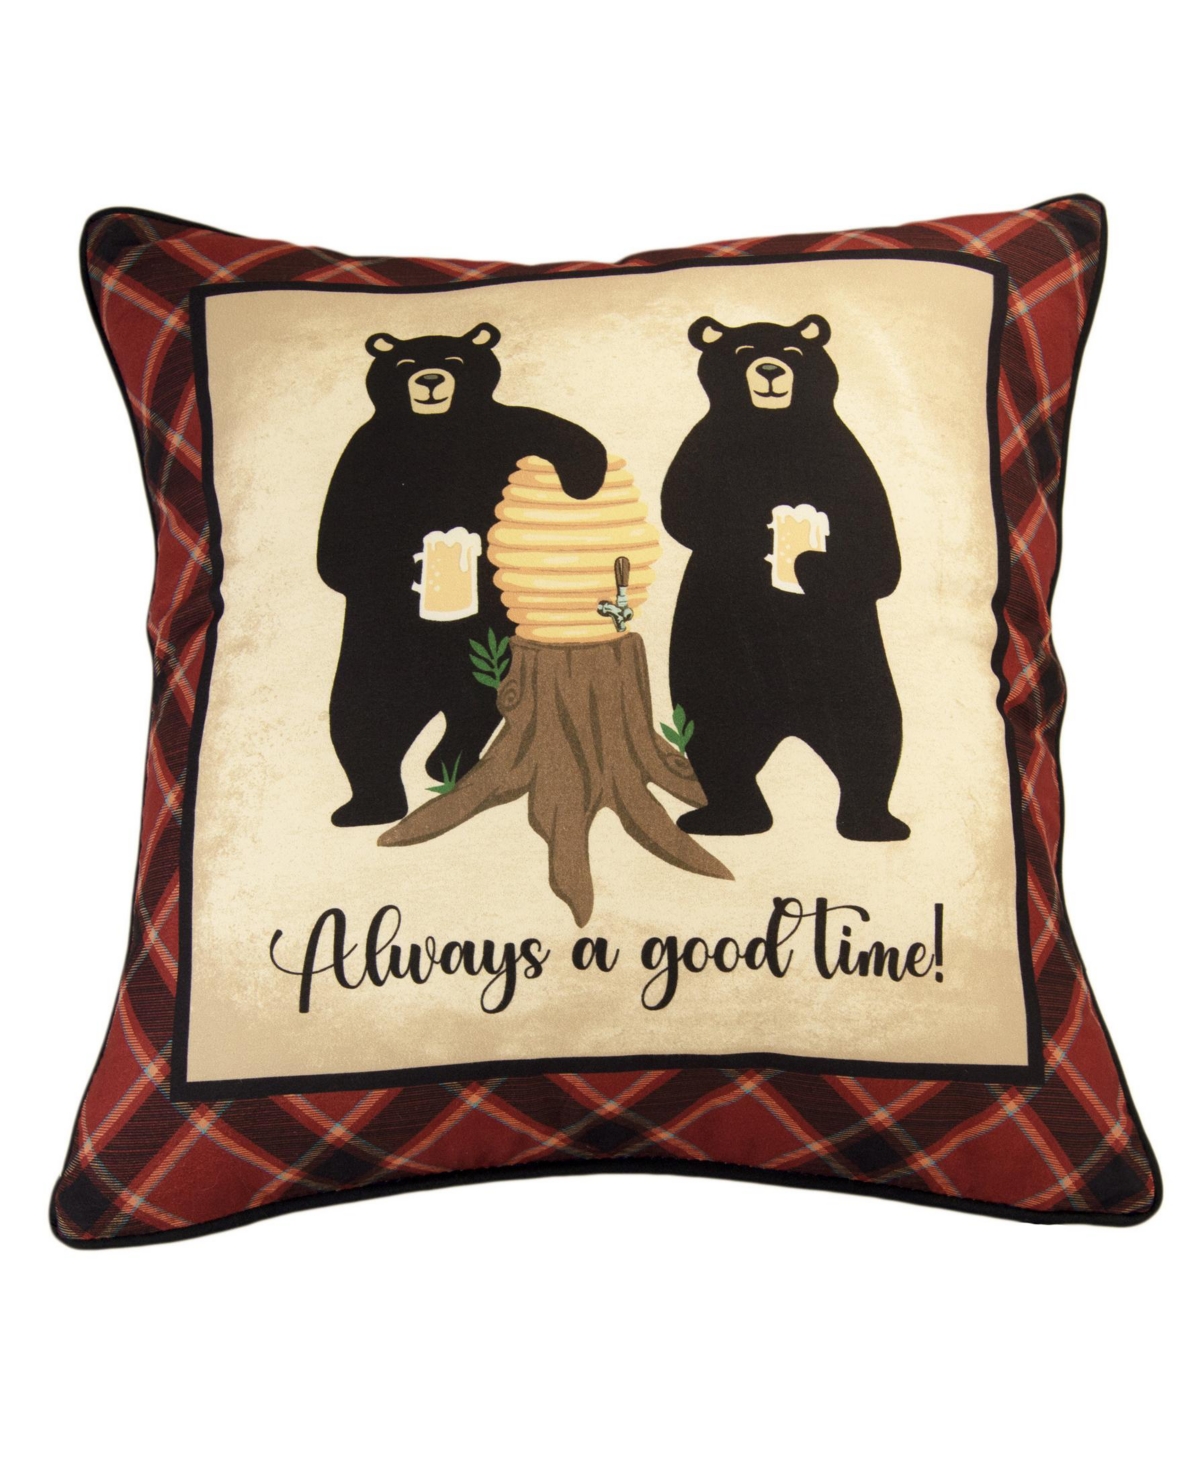 Donna Sharp Forest Grove Good Time Decorative Pillow, 16" X 16" In Multi